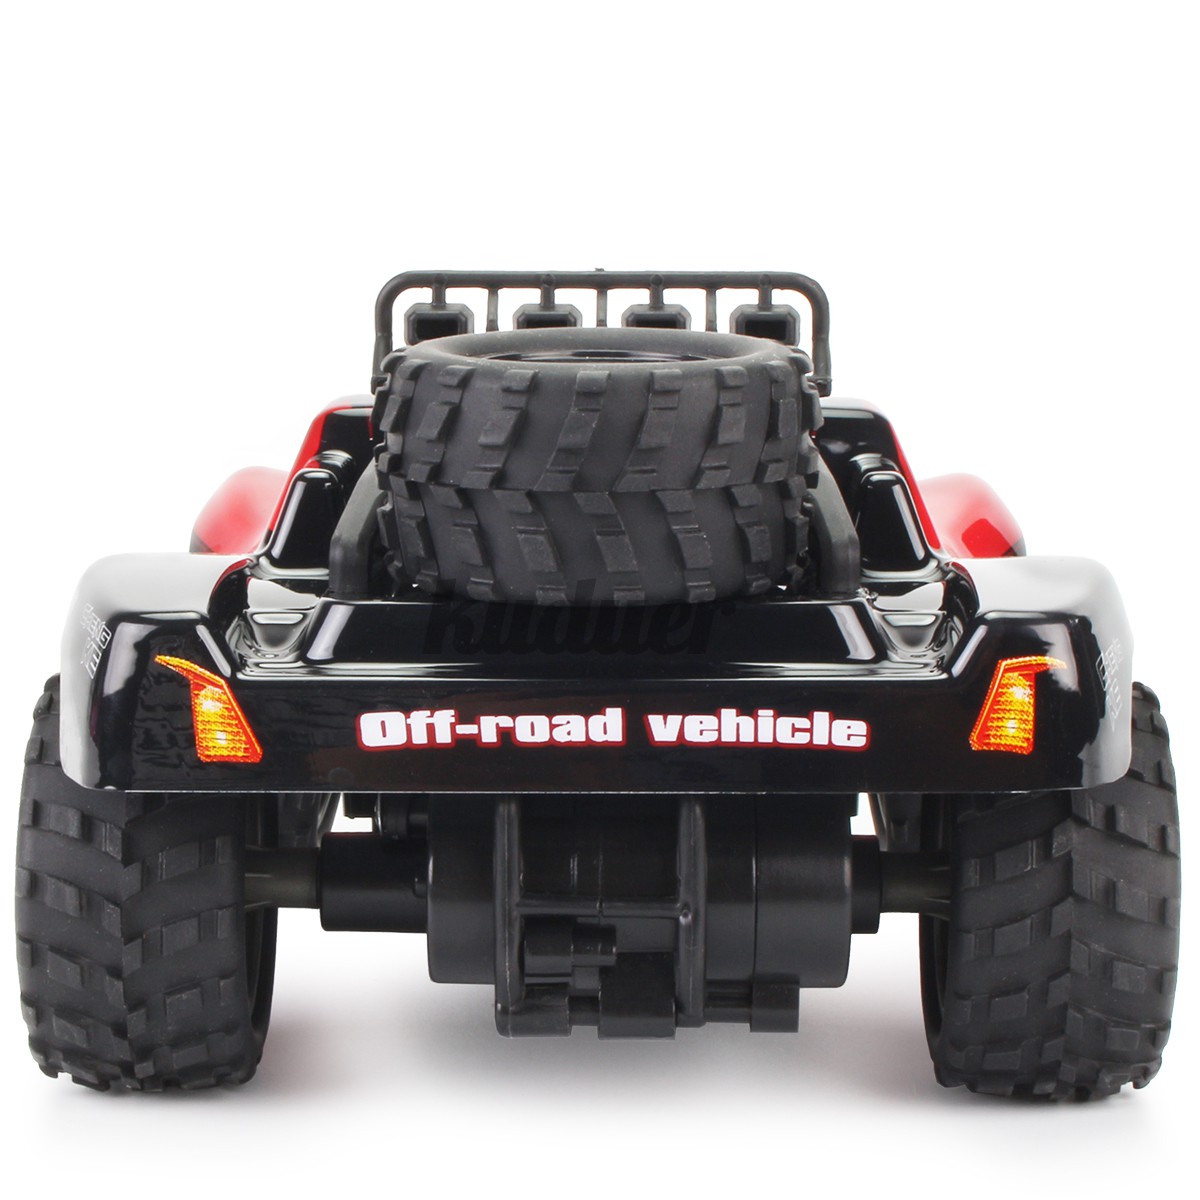 1:18 48KM/H Remote Control RC Car Monster Truck Off Road Vehicle Child Xmas Gift